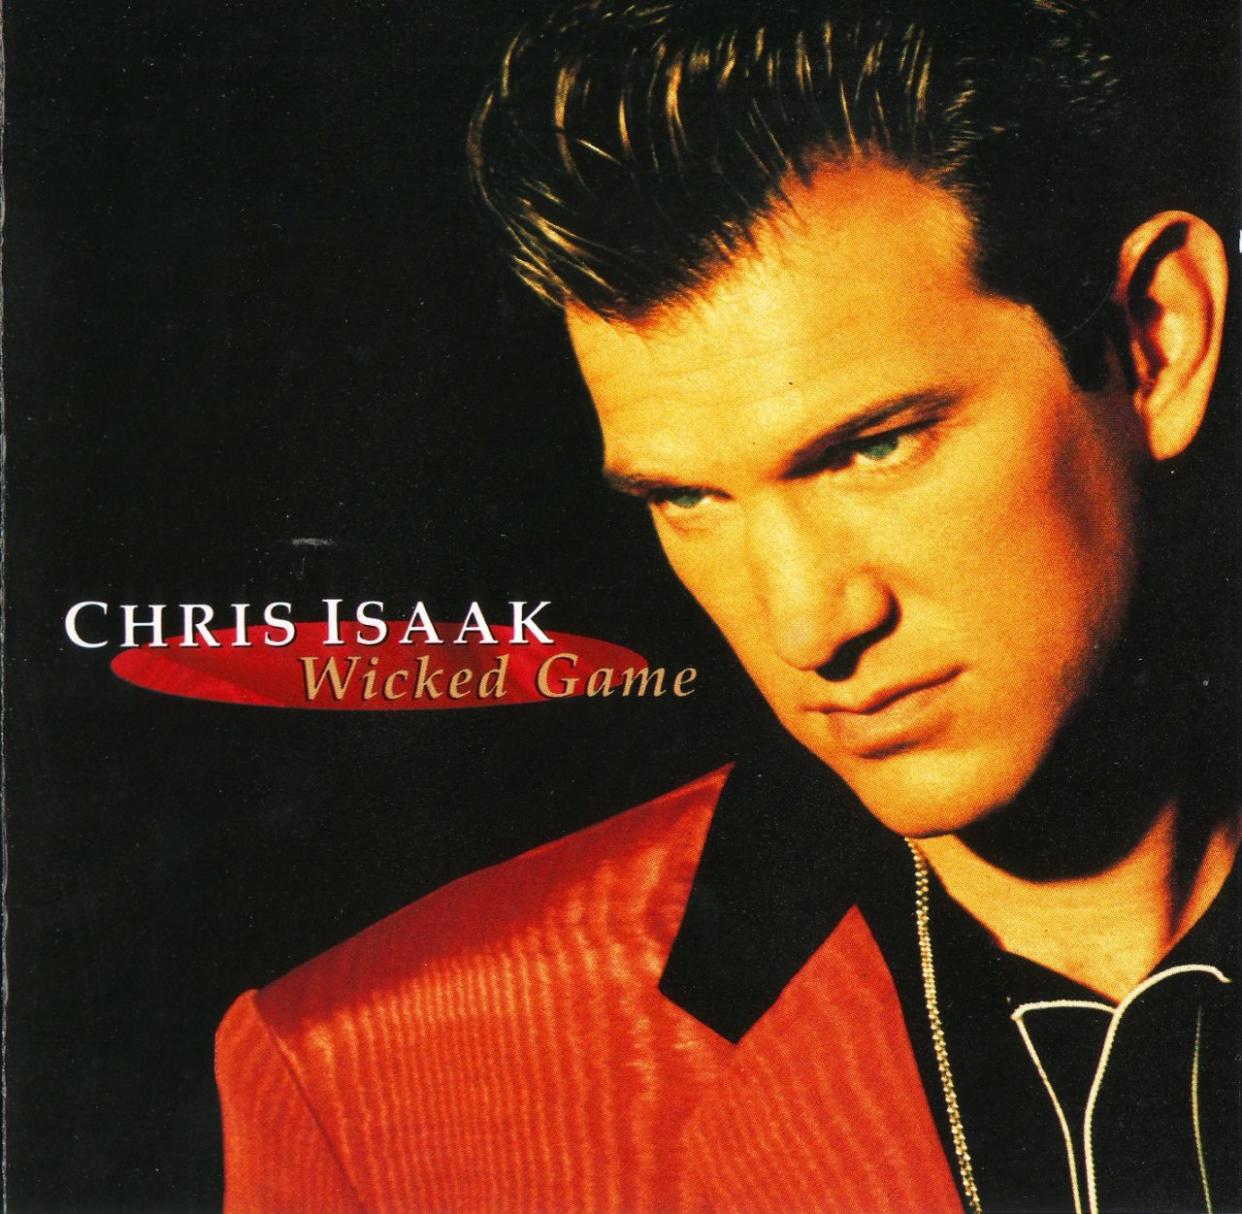 chris-isaak-wicked-game-1989-1604352241